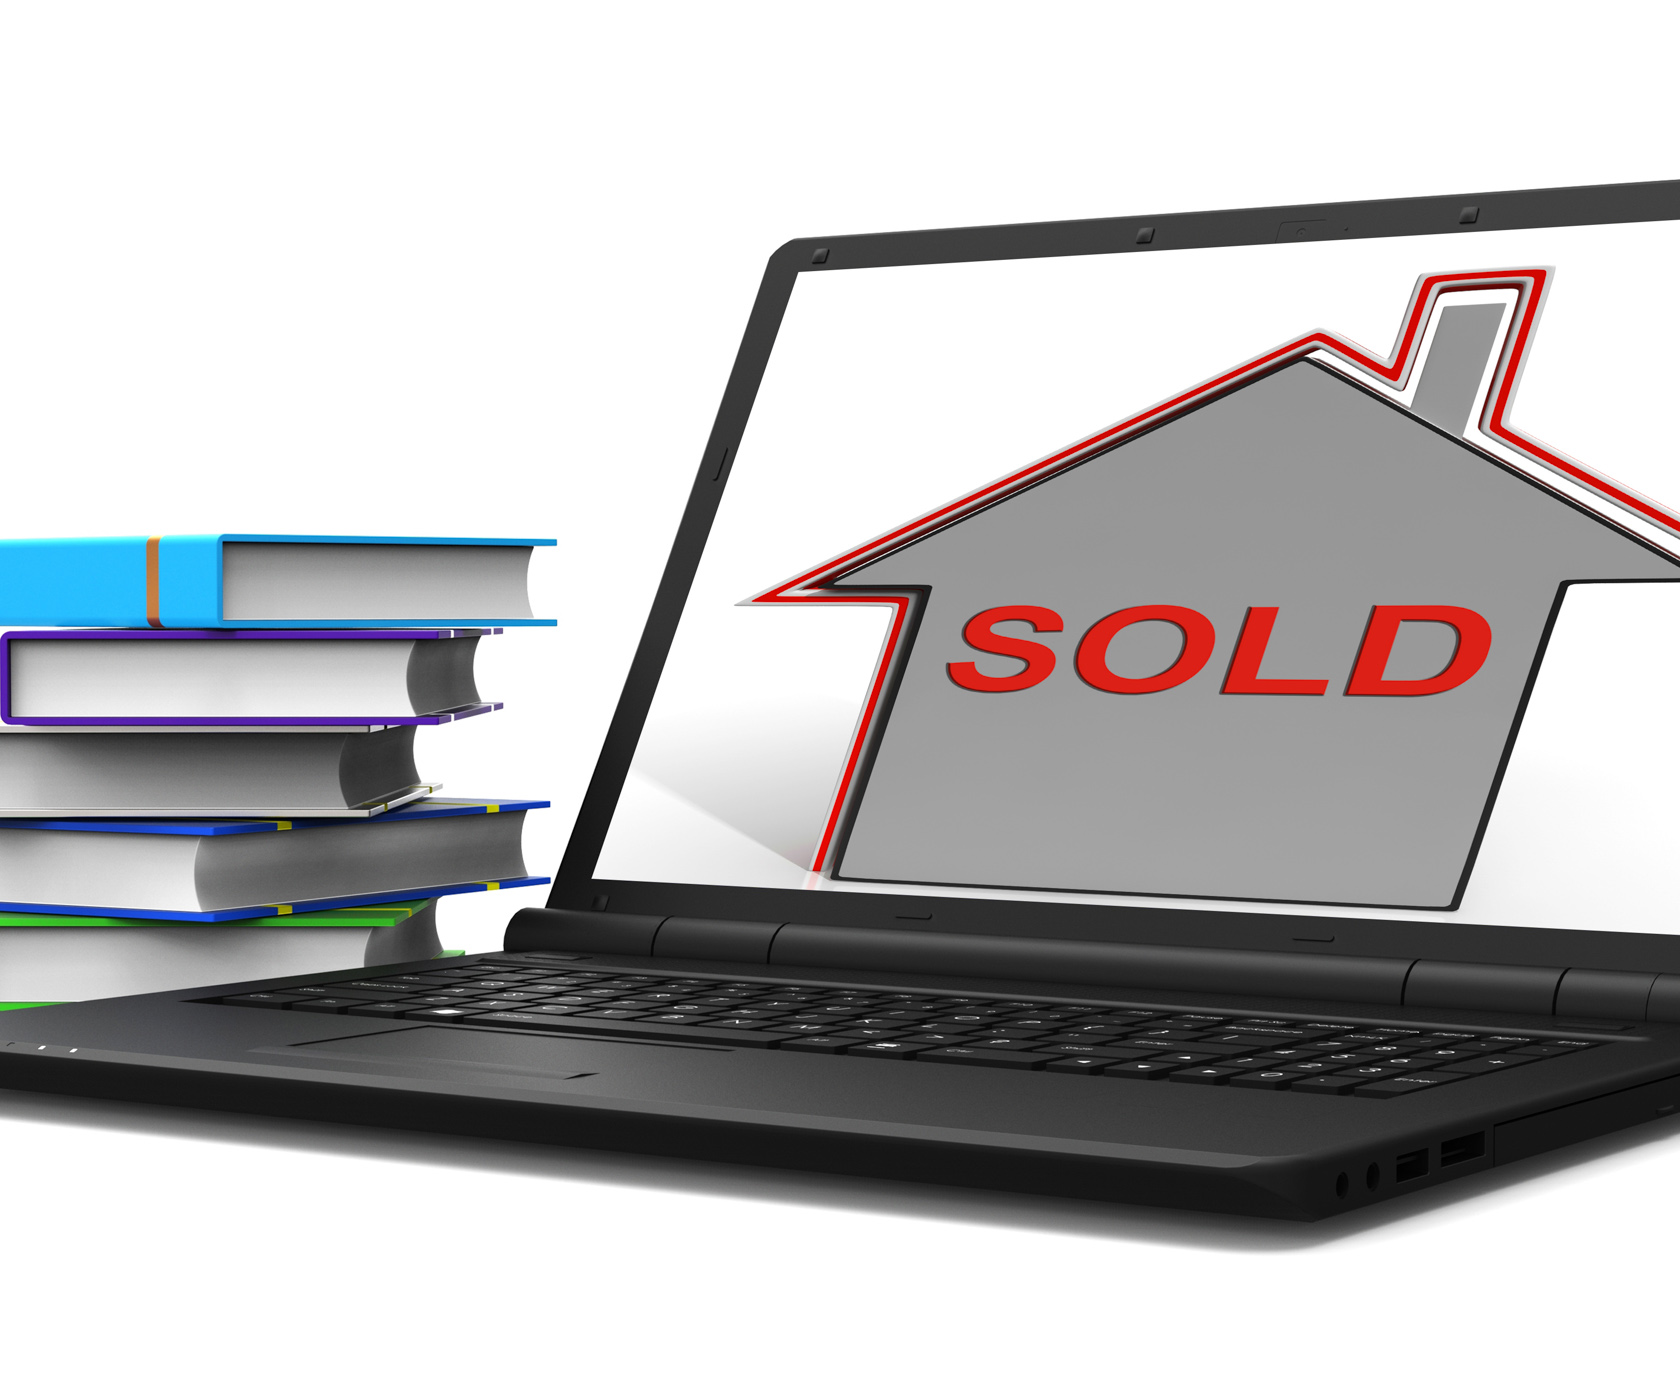 Sold house laptop shows sale and purchase of property photo